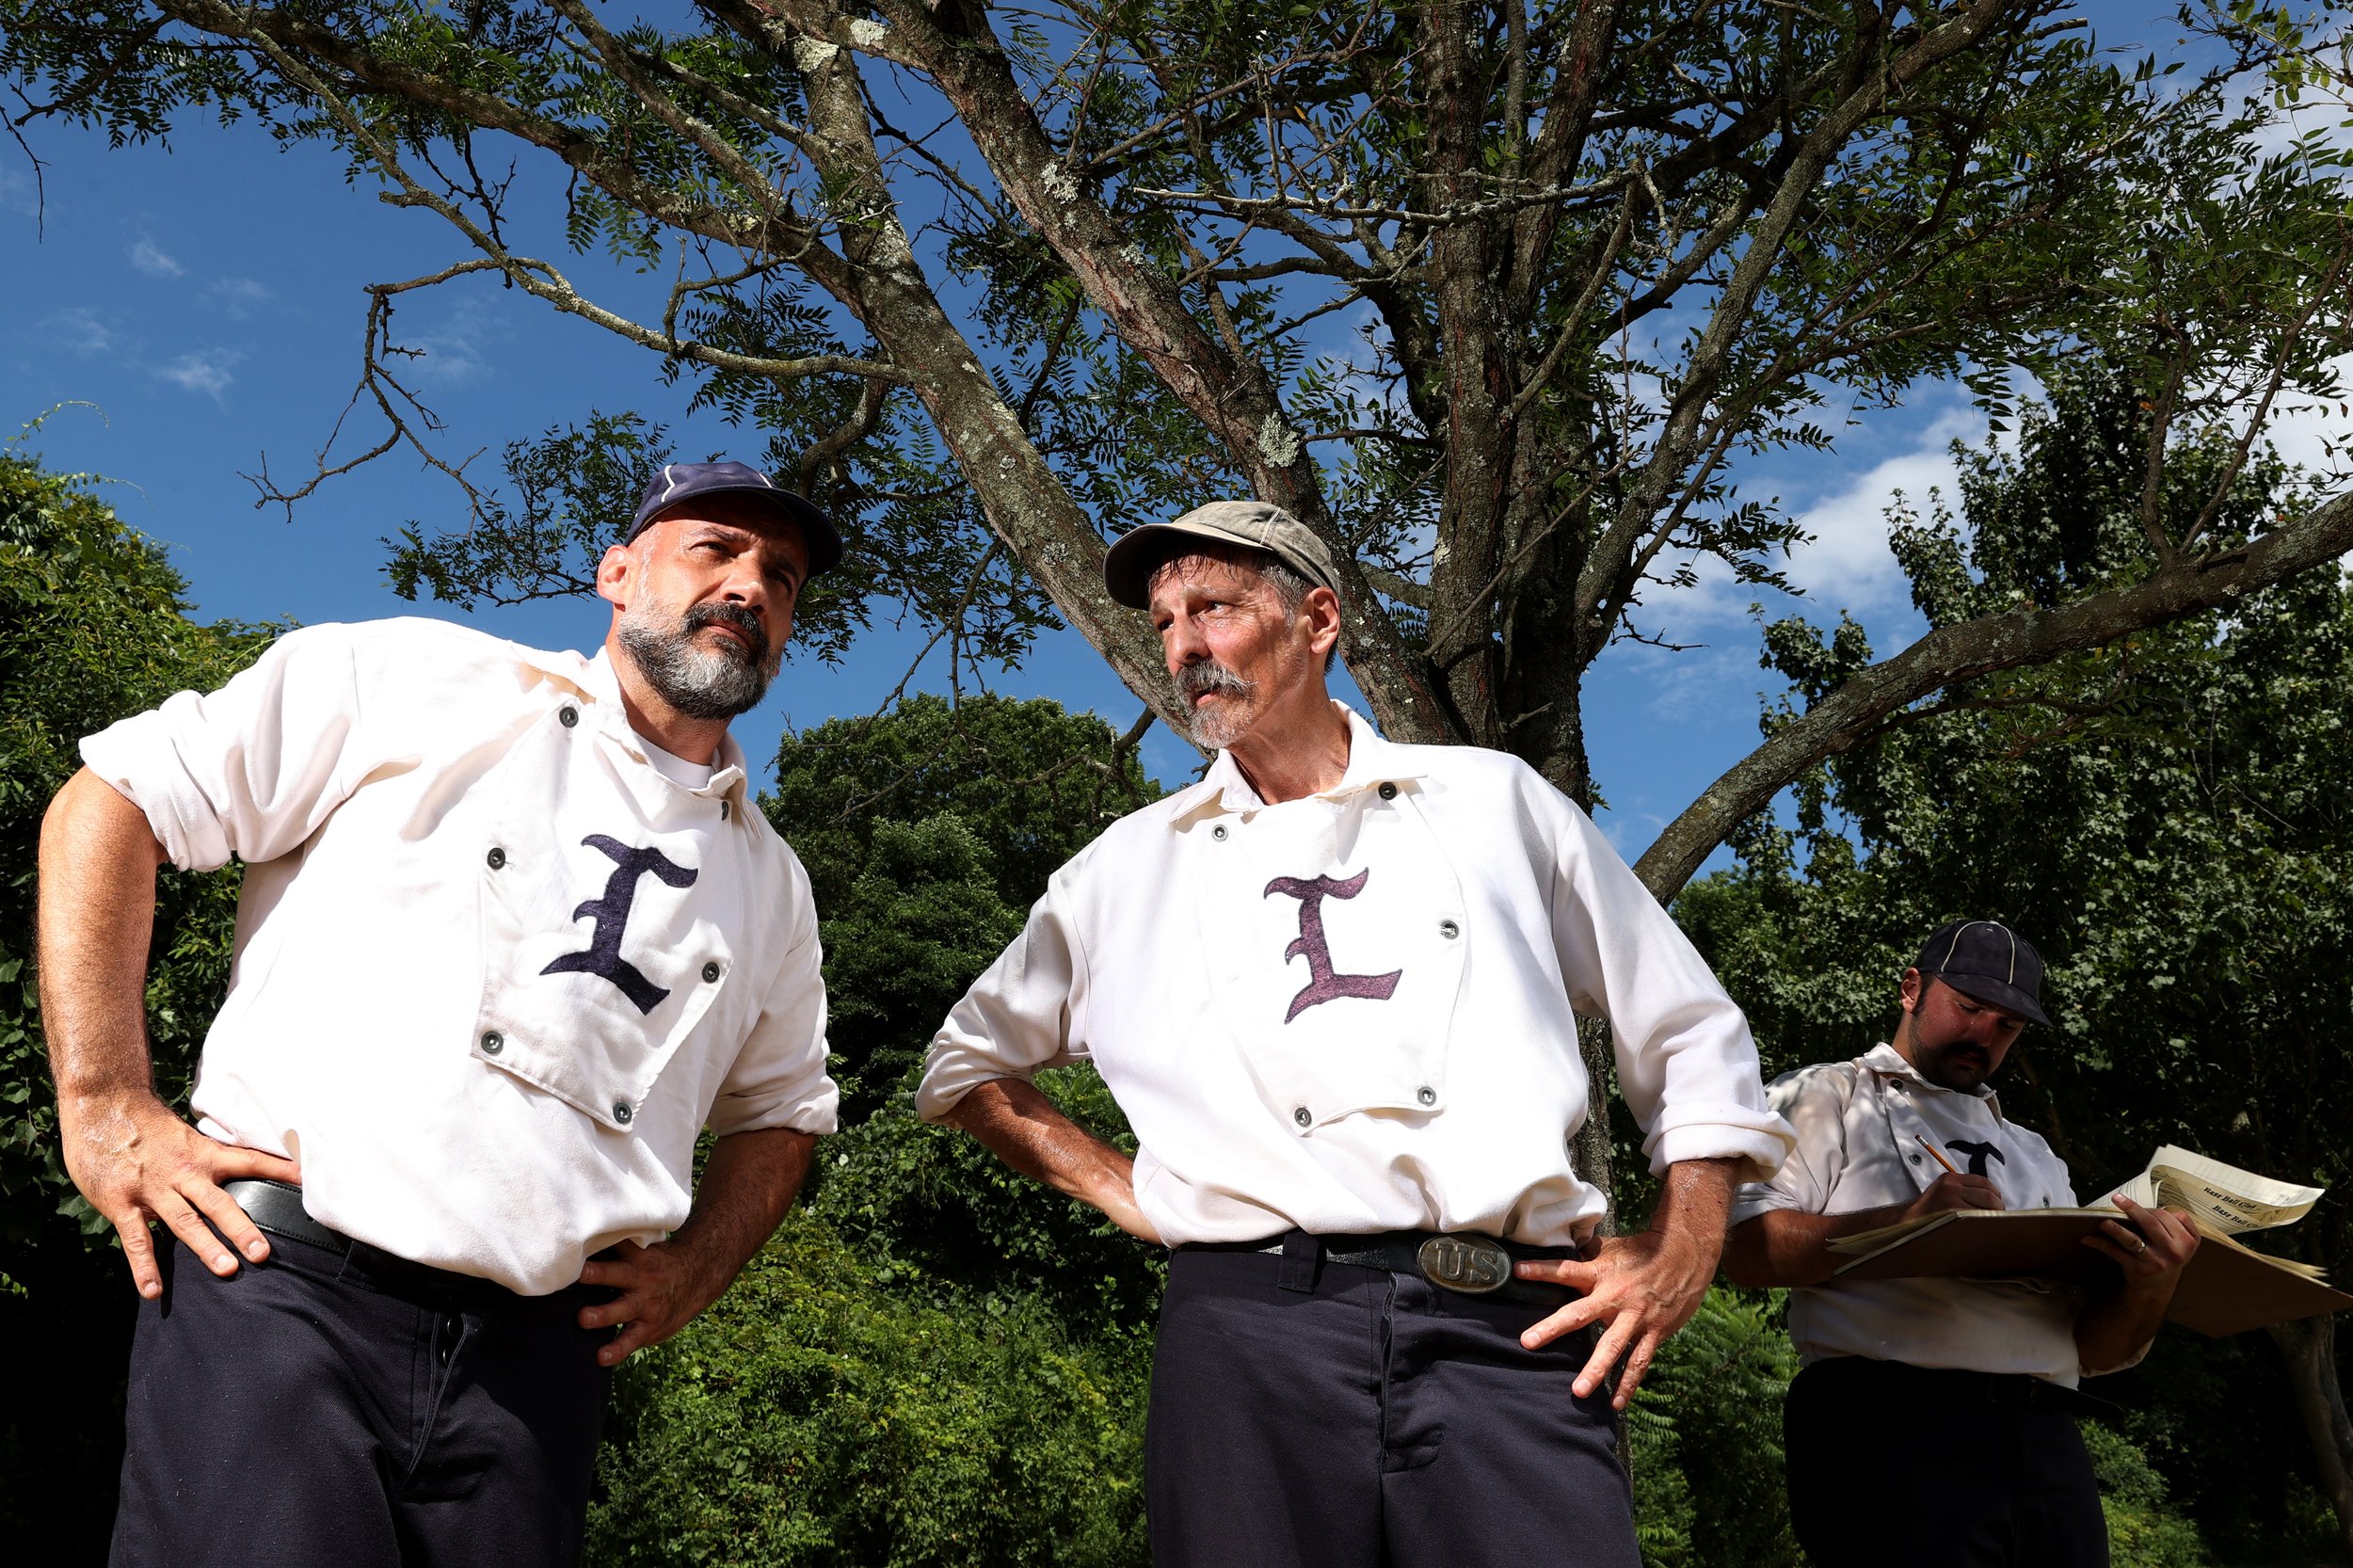  Members of the New Jersey Liberty watch their team's game during the 25th Annual Doc Adams Old Time Base Ball Festival at Old Bethpage Village Restoration on August 07, 2022 in Old Bethpage, New York. 